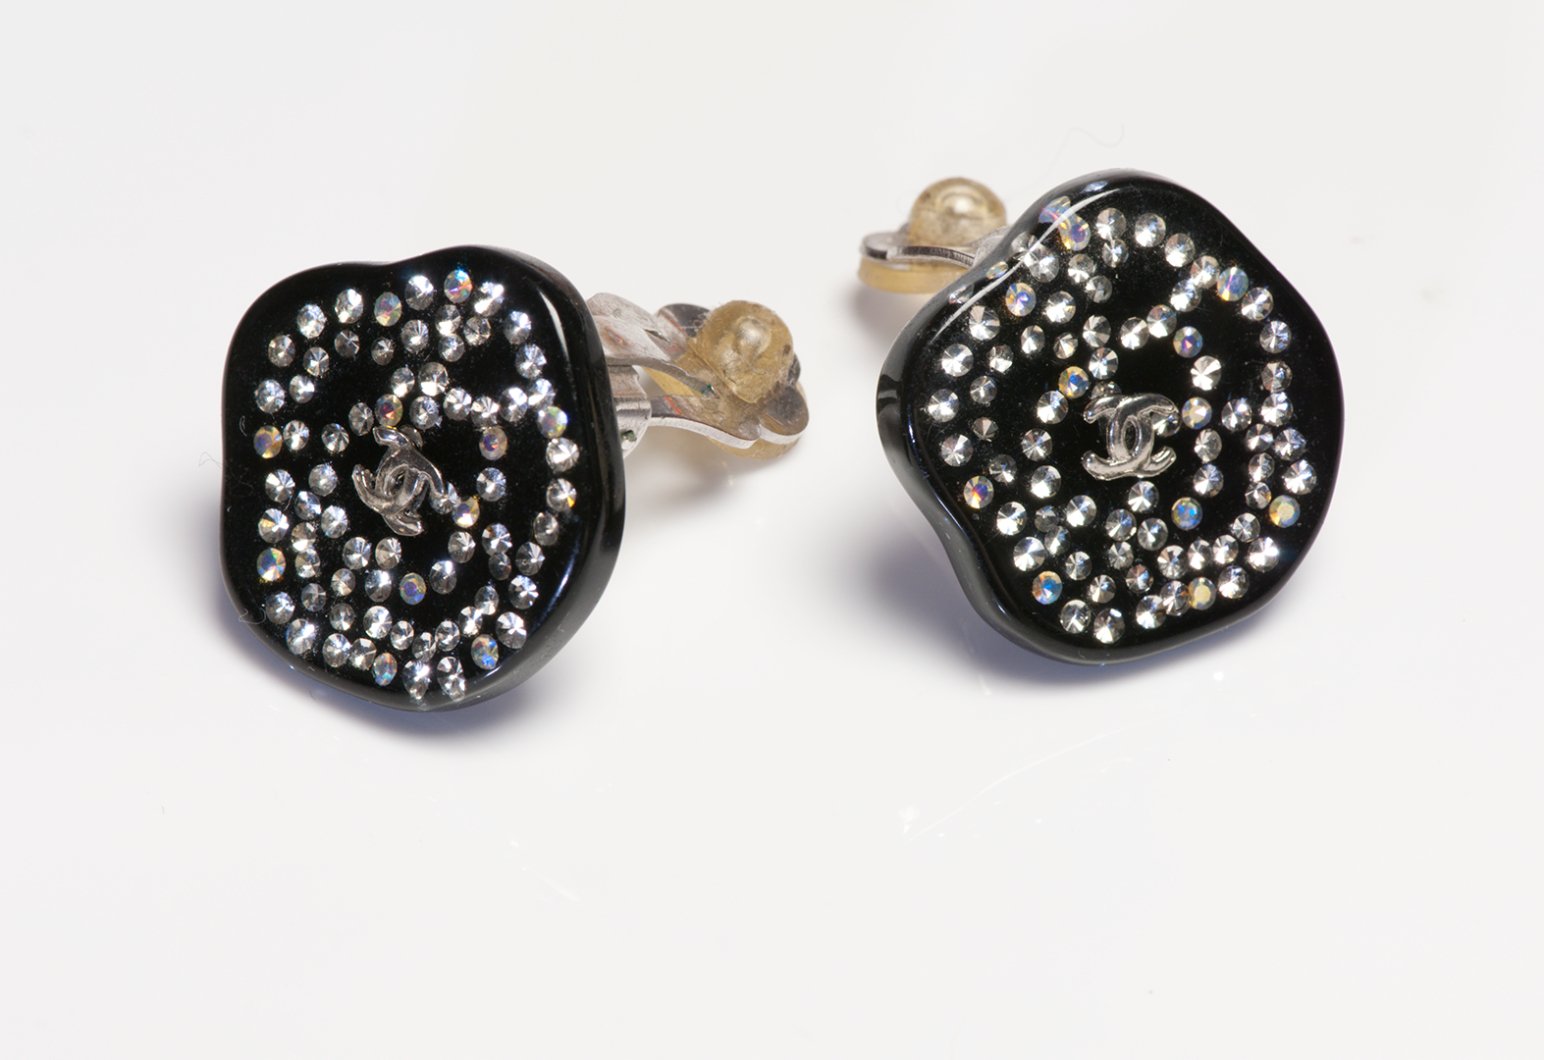 CHANEL Paris 2003 Fall CC Black Resin Camellia Flower Crystal Earrings - DSF Antique Jewelry